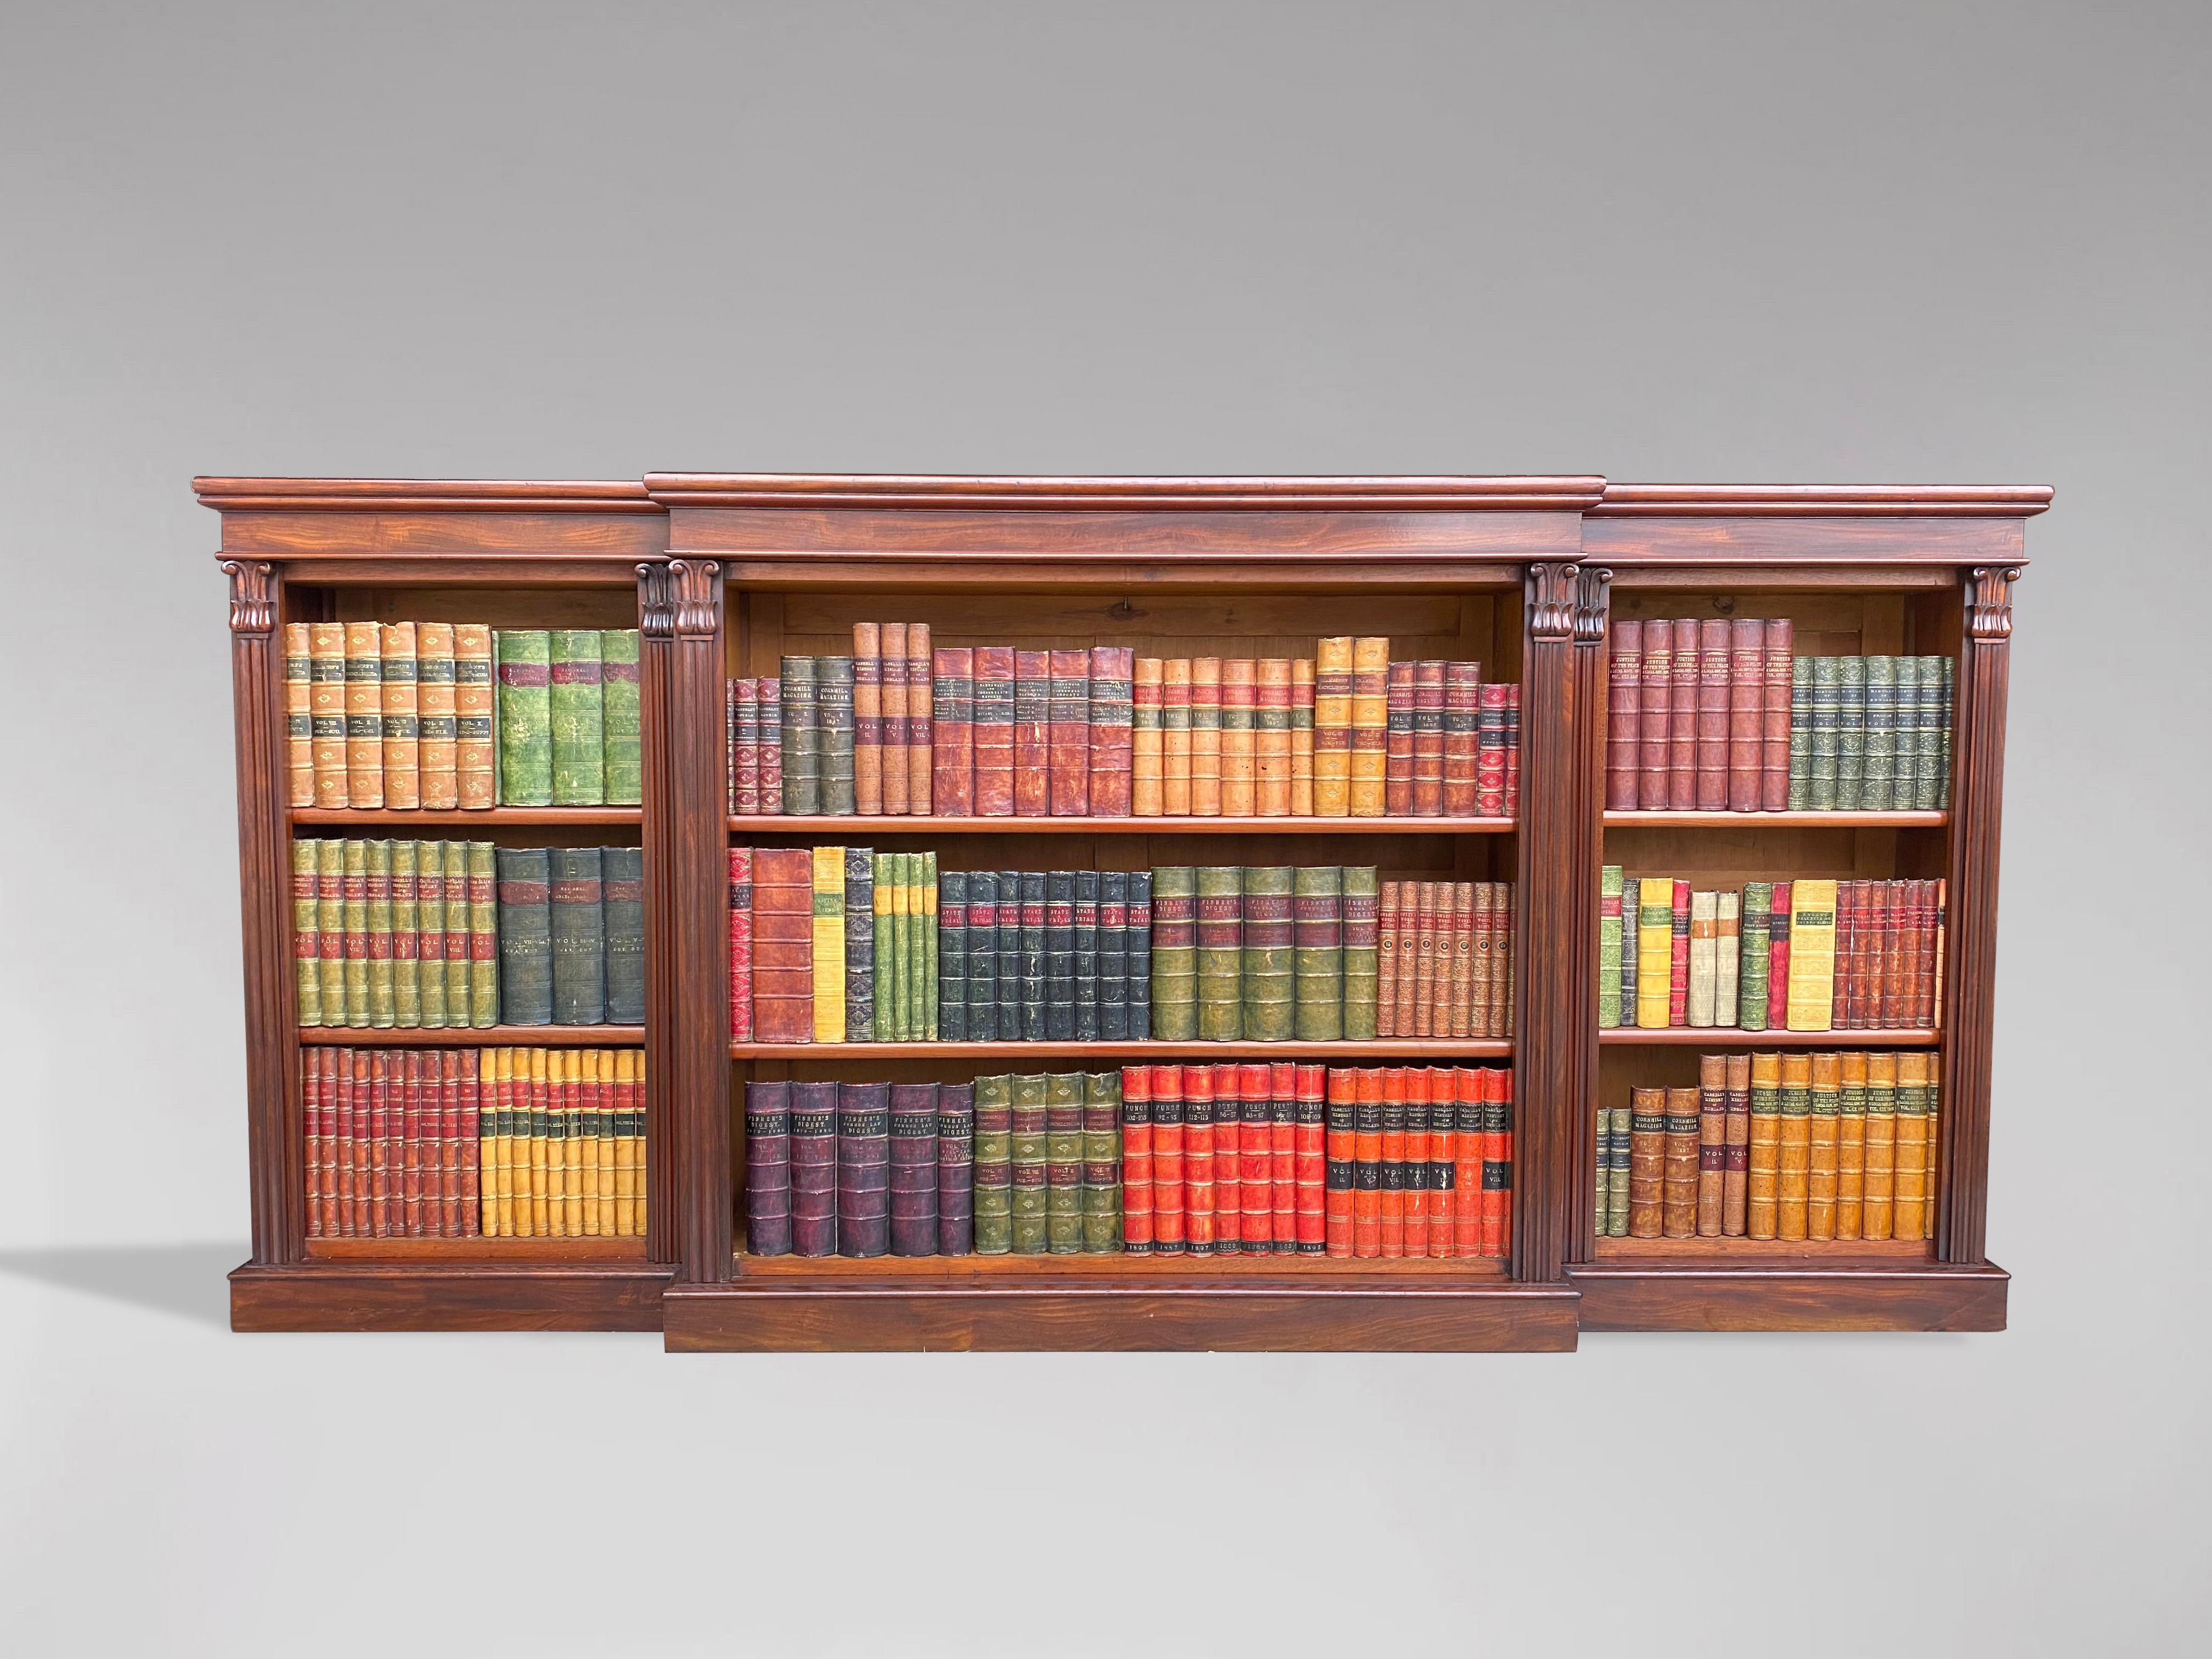 Large 19th century, early Victorian period solid mahogany breakfront open library bookcase. Each section has two adjustable shelves, providing substantial display space for books, flanked by six carved reeded pillars or columns with capitals. All